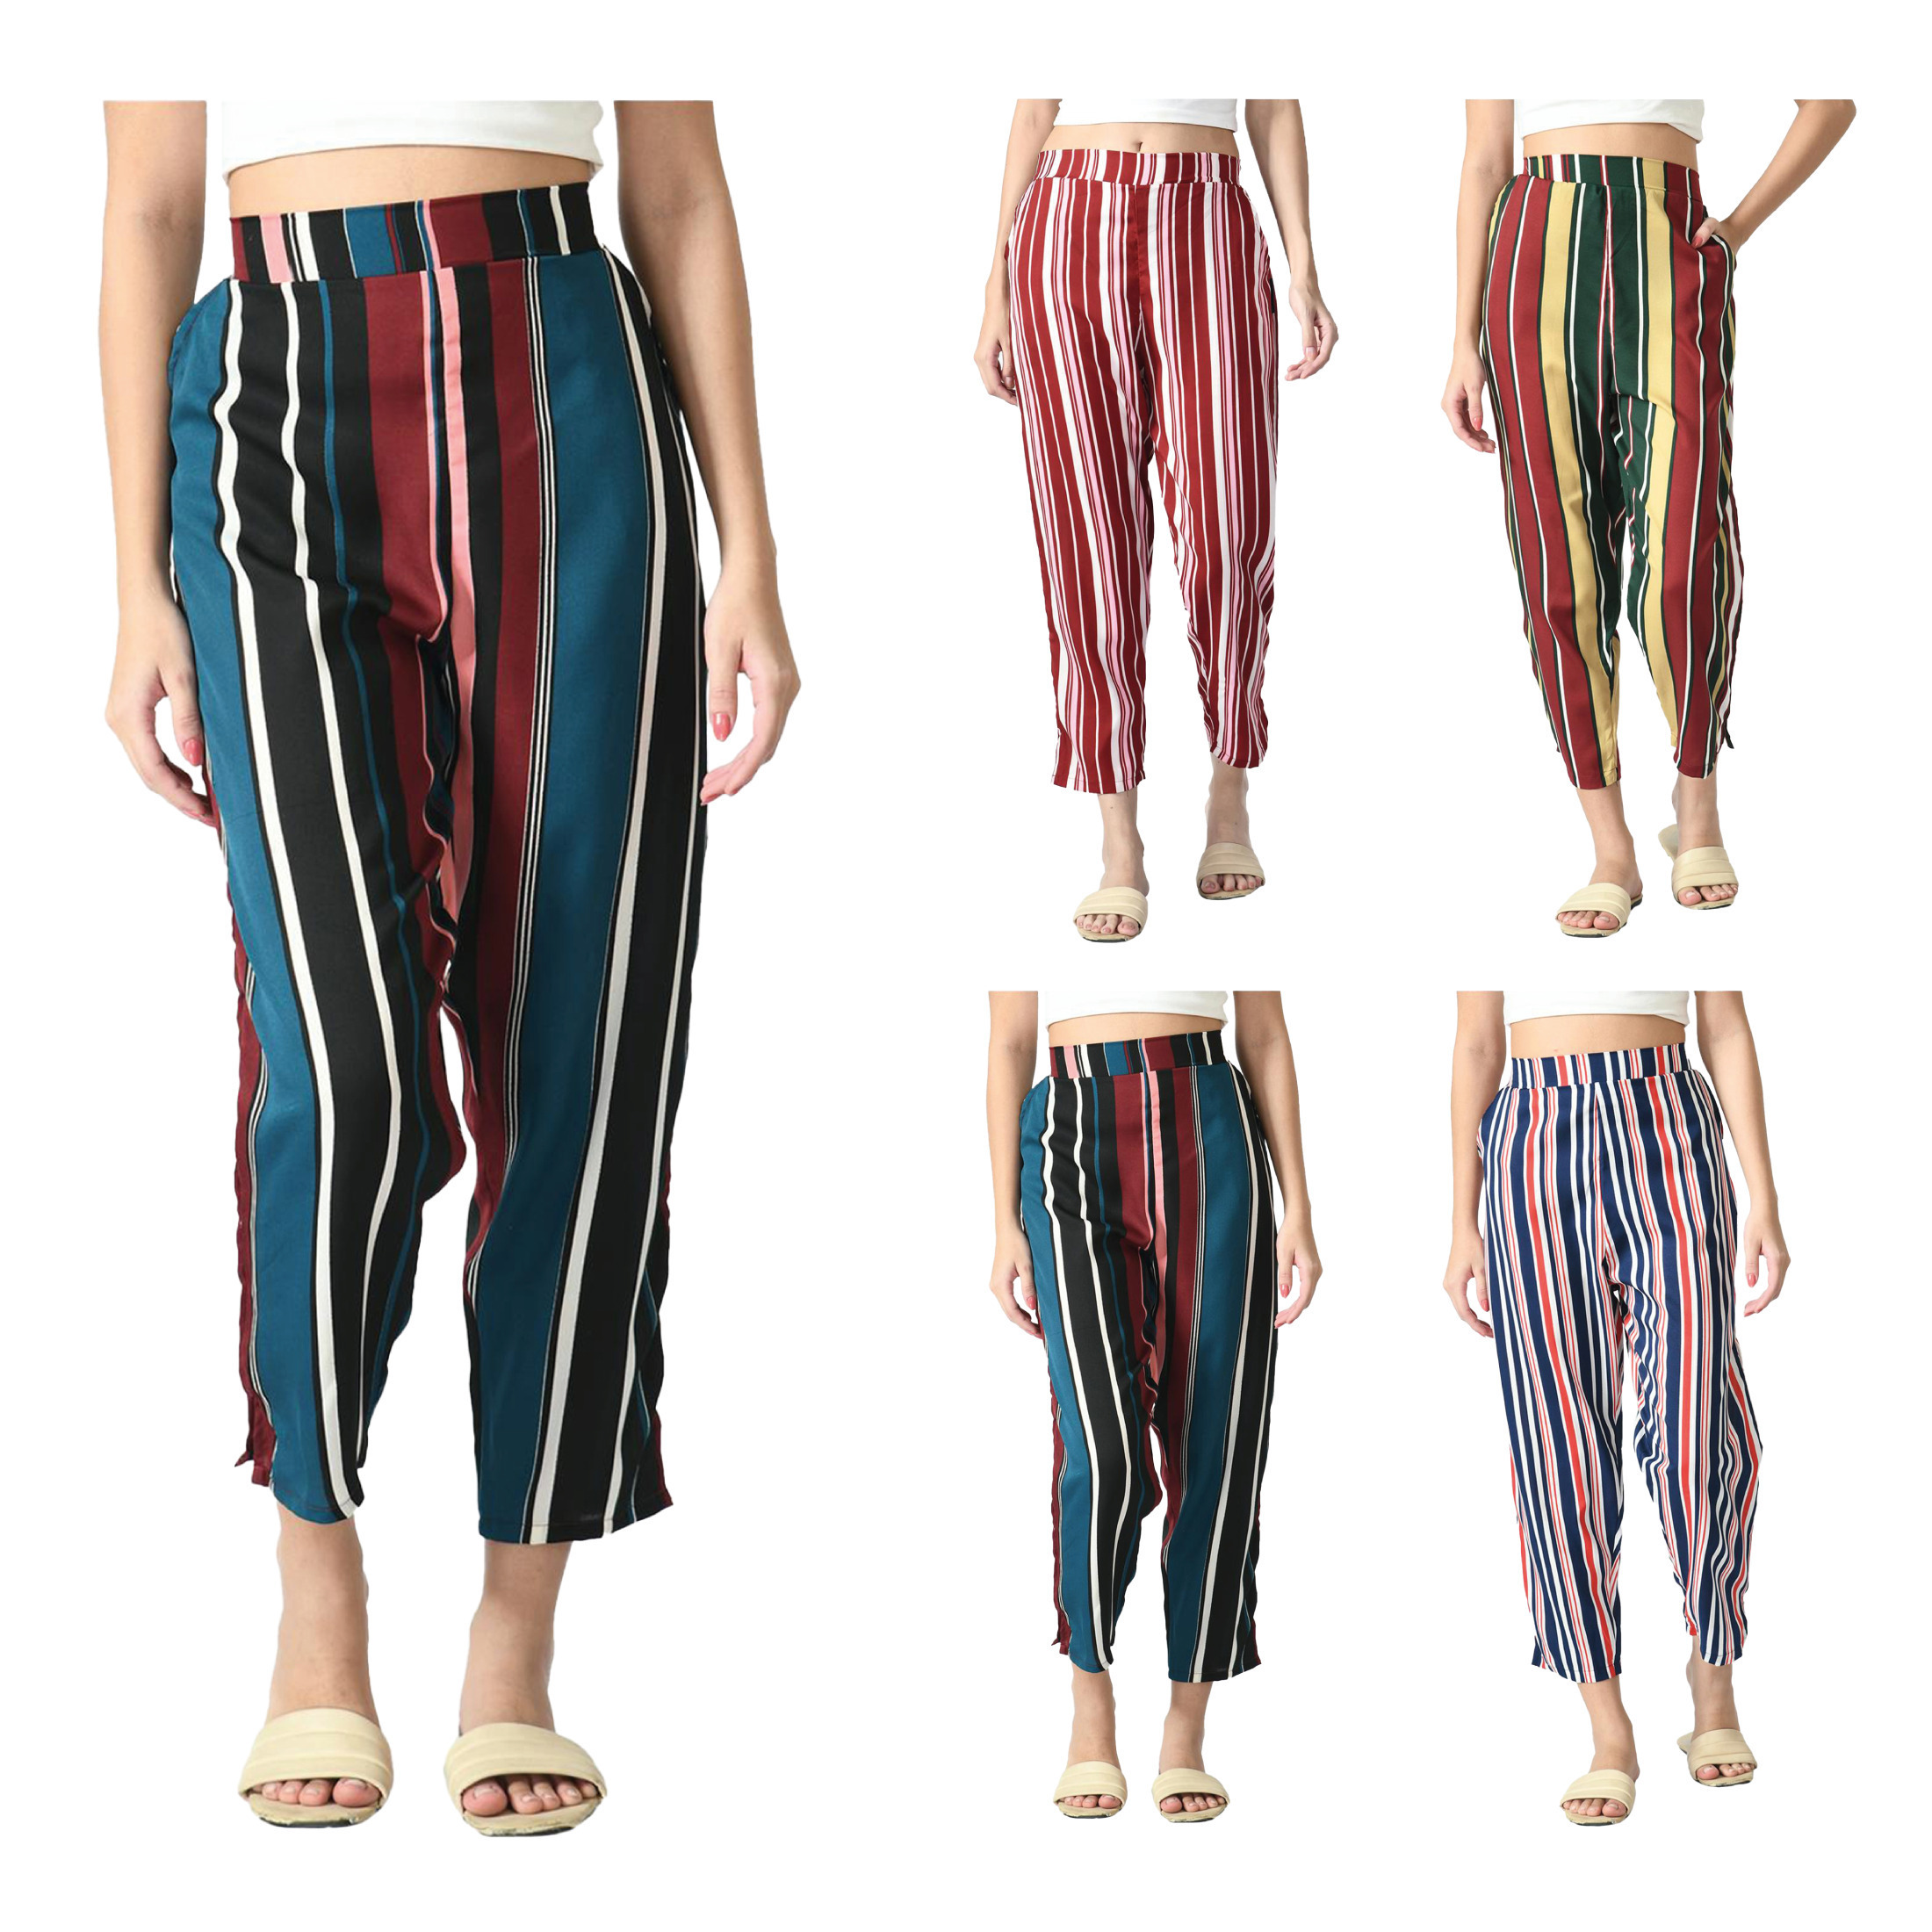 3-Pack Women's Cotton Palazzo Pants Striped Print Soft & Comfortable Western Style Regular Fit Ladies Trouser - M